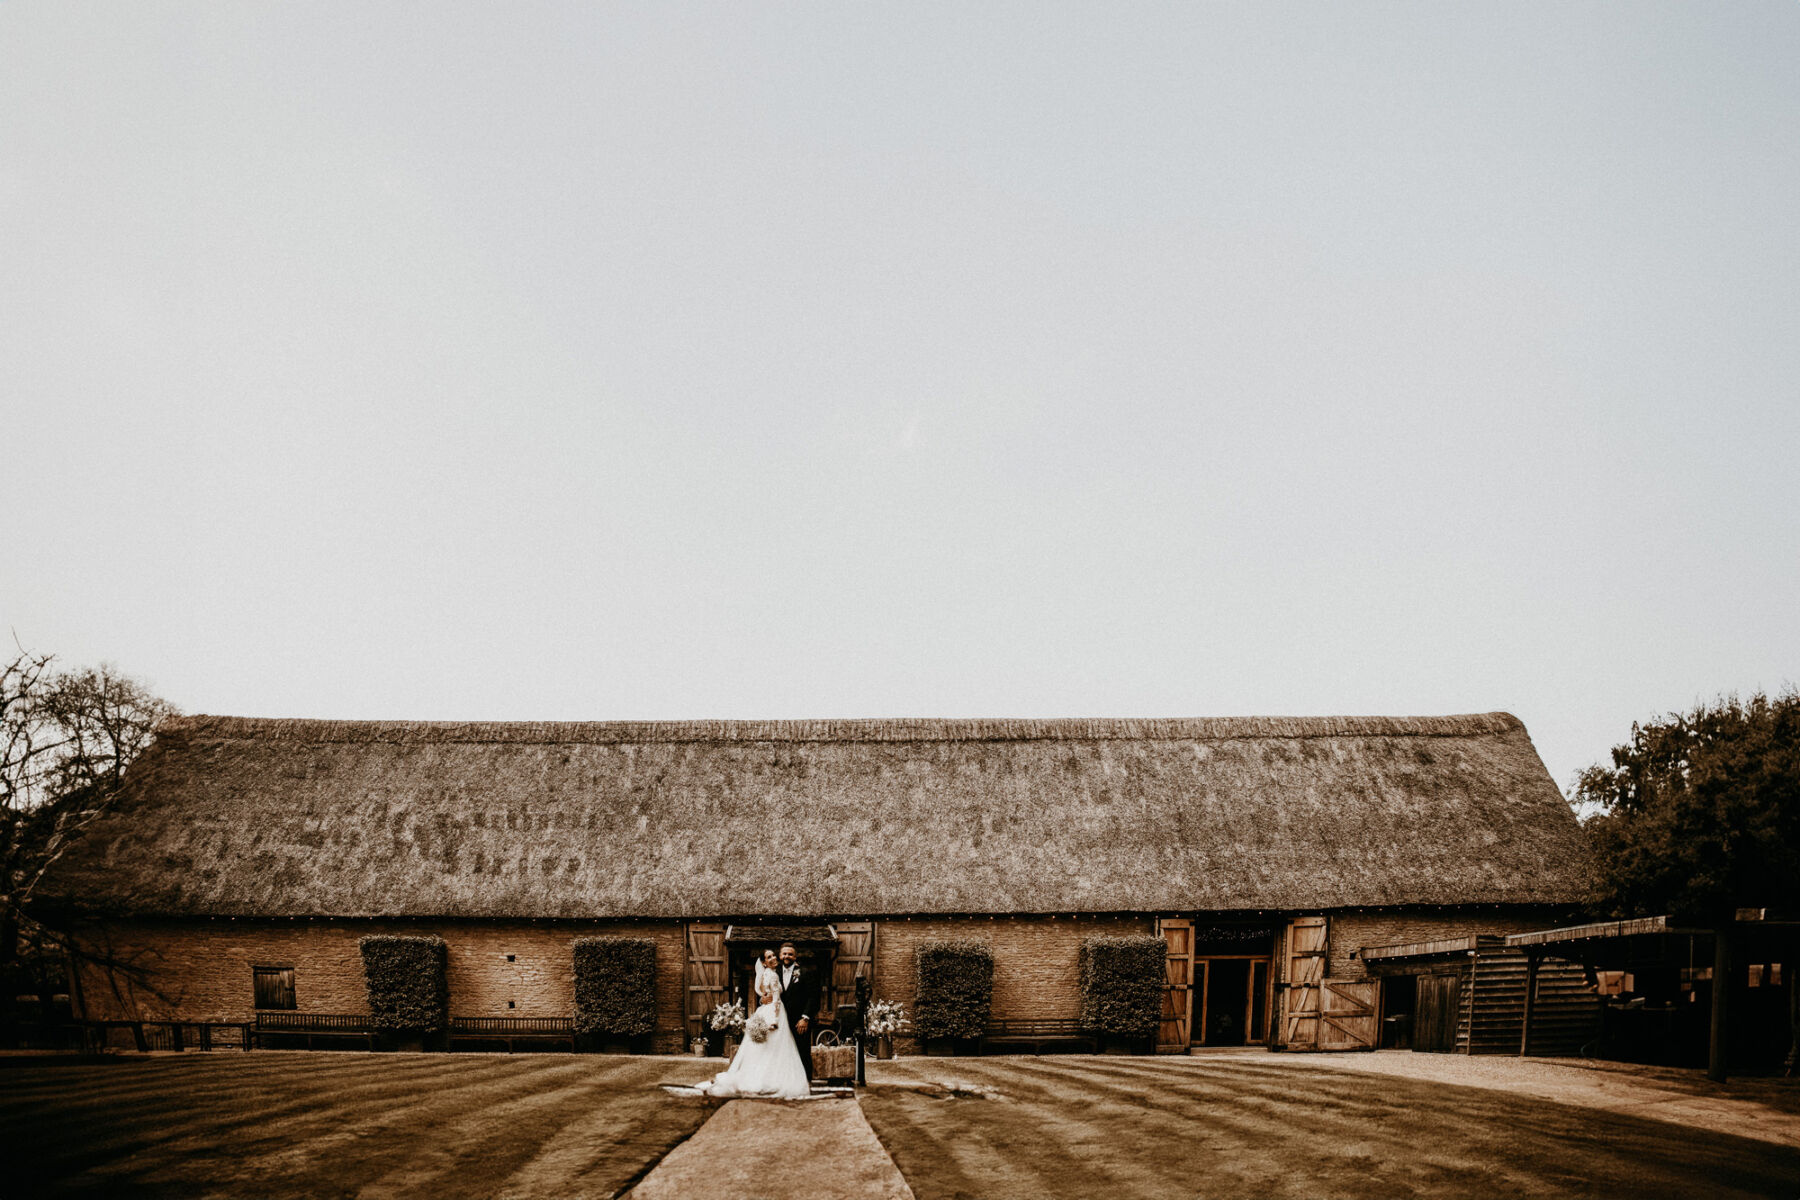 Tythe barn wedding venue, The Cotswolds.